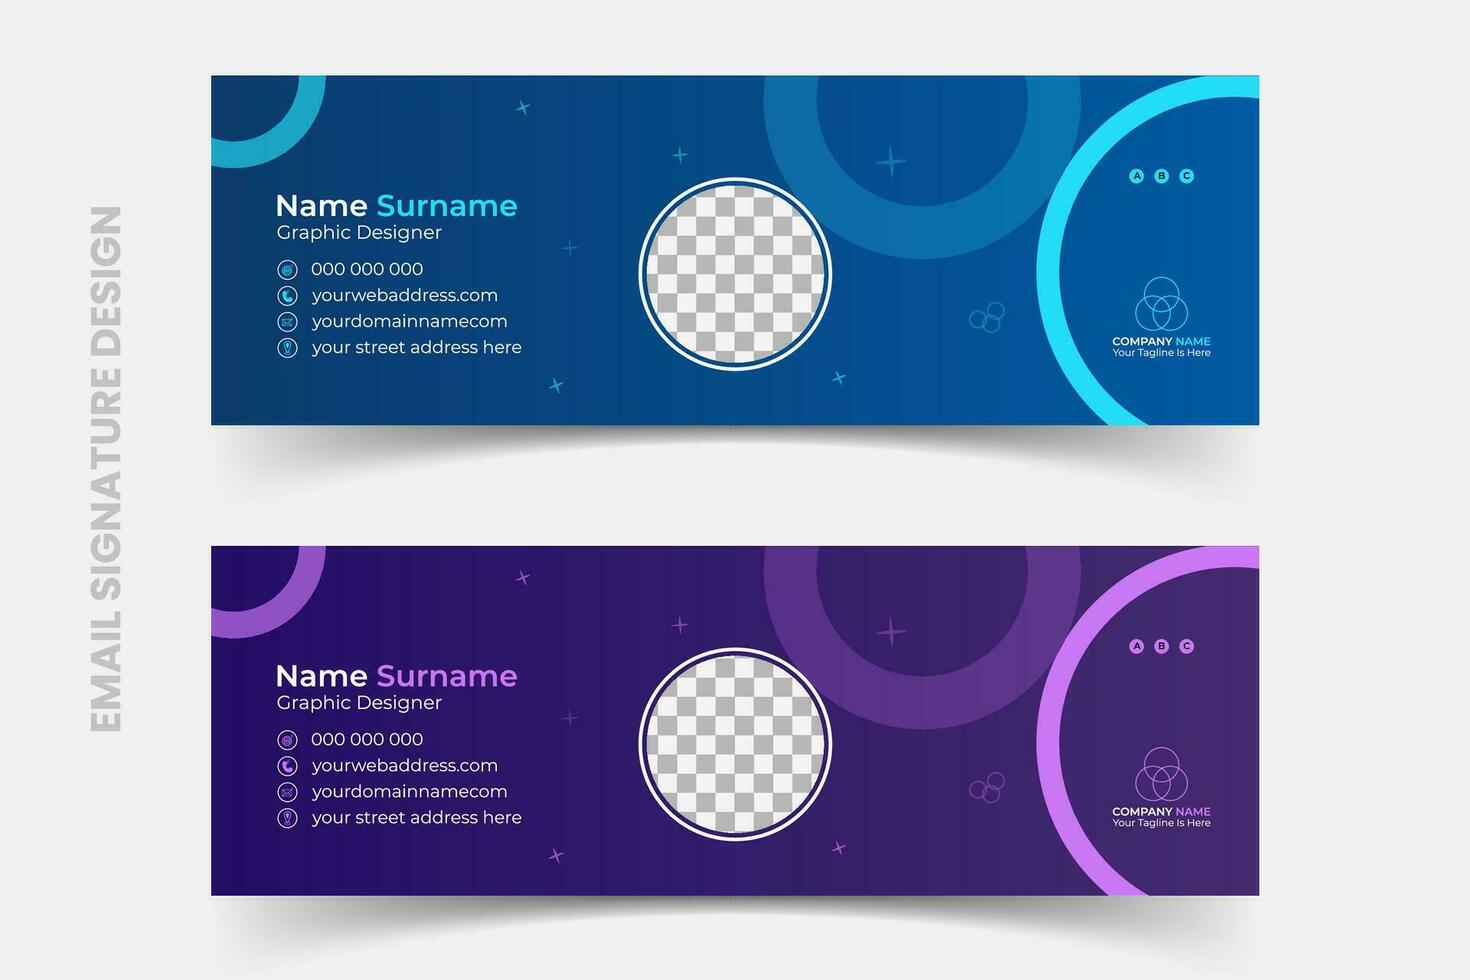 Corporate, modern and professional email signature template, creative multifaceted business email signature design set with blue and purple background vector